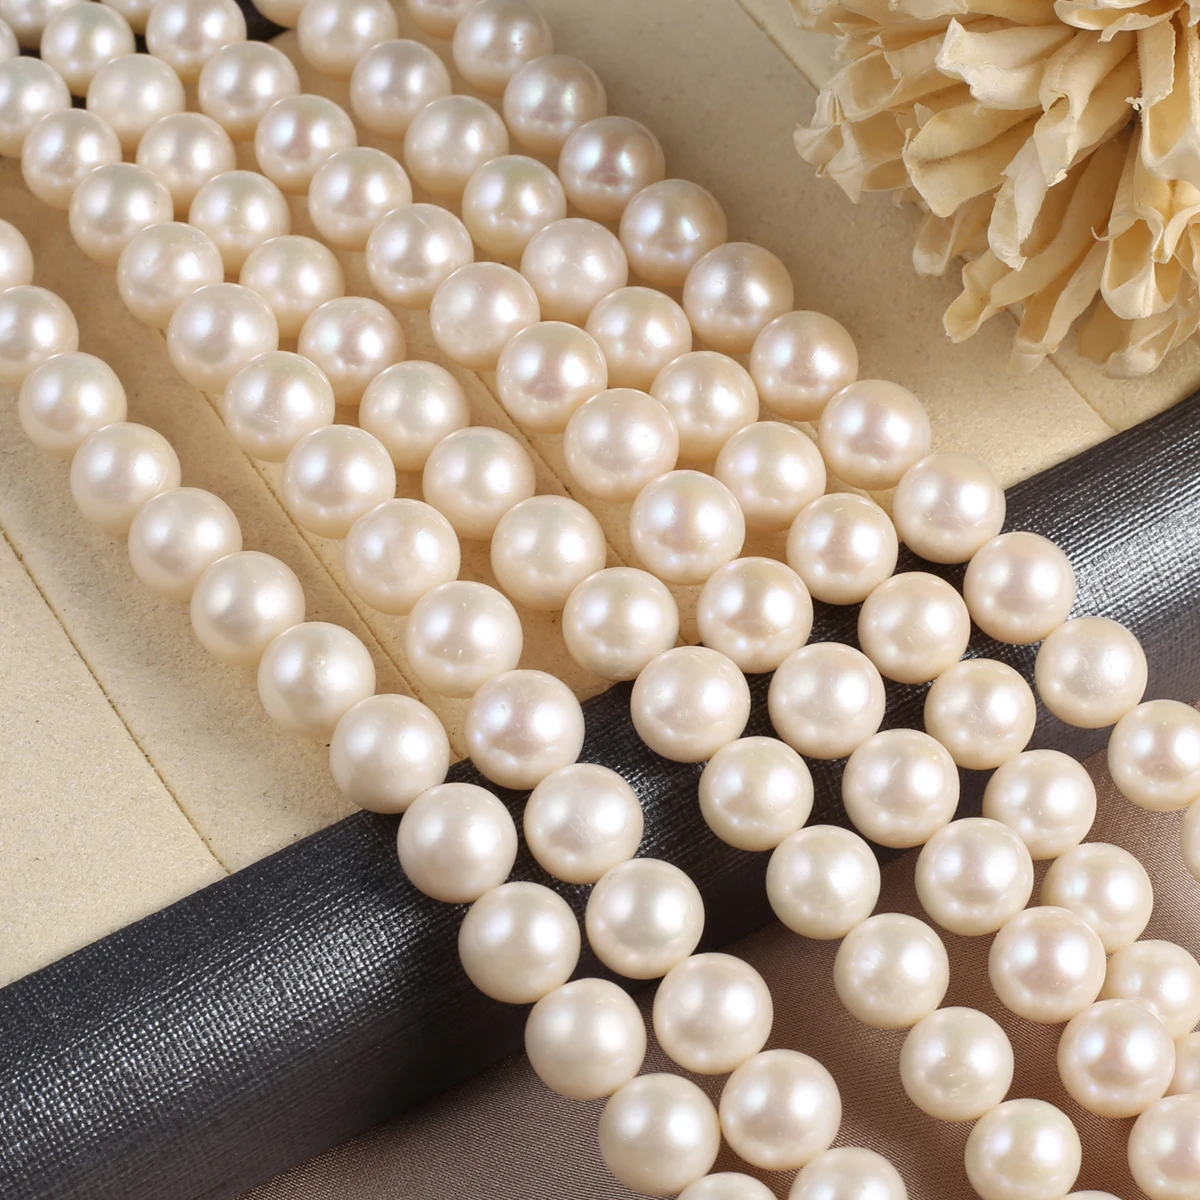 

White Natural Freshwater Pearl Punch Beads 9-10mm Jewelry Making DIY Wedding Necklace Bracelet Accessories Elegant Jewelry 36CM